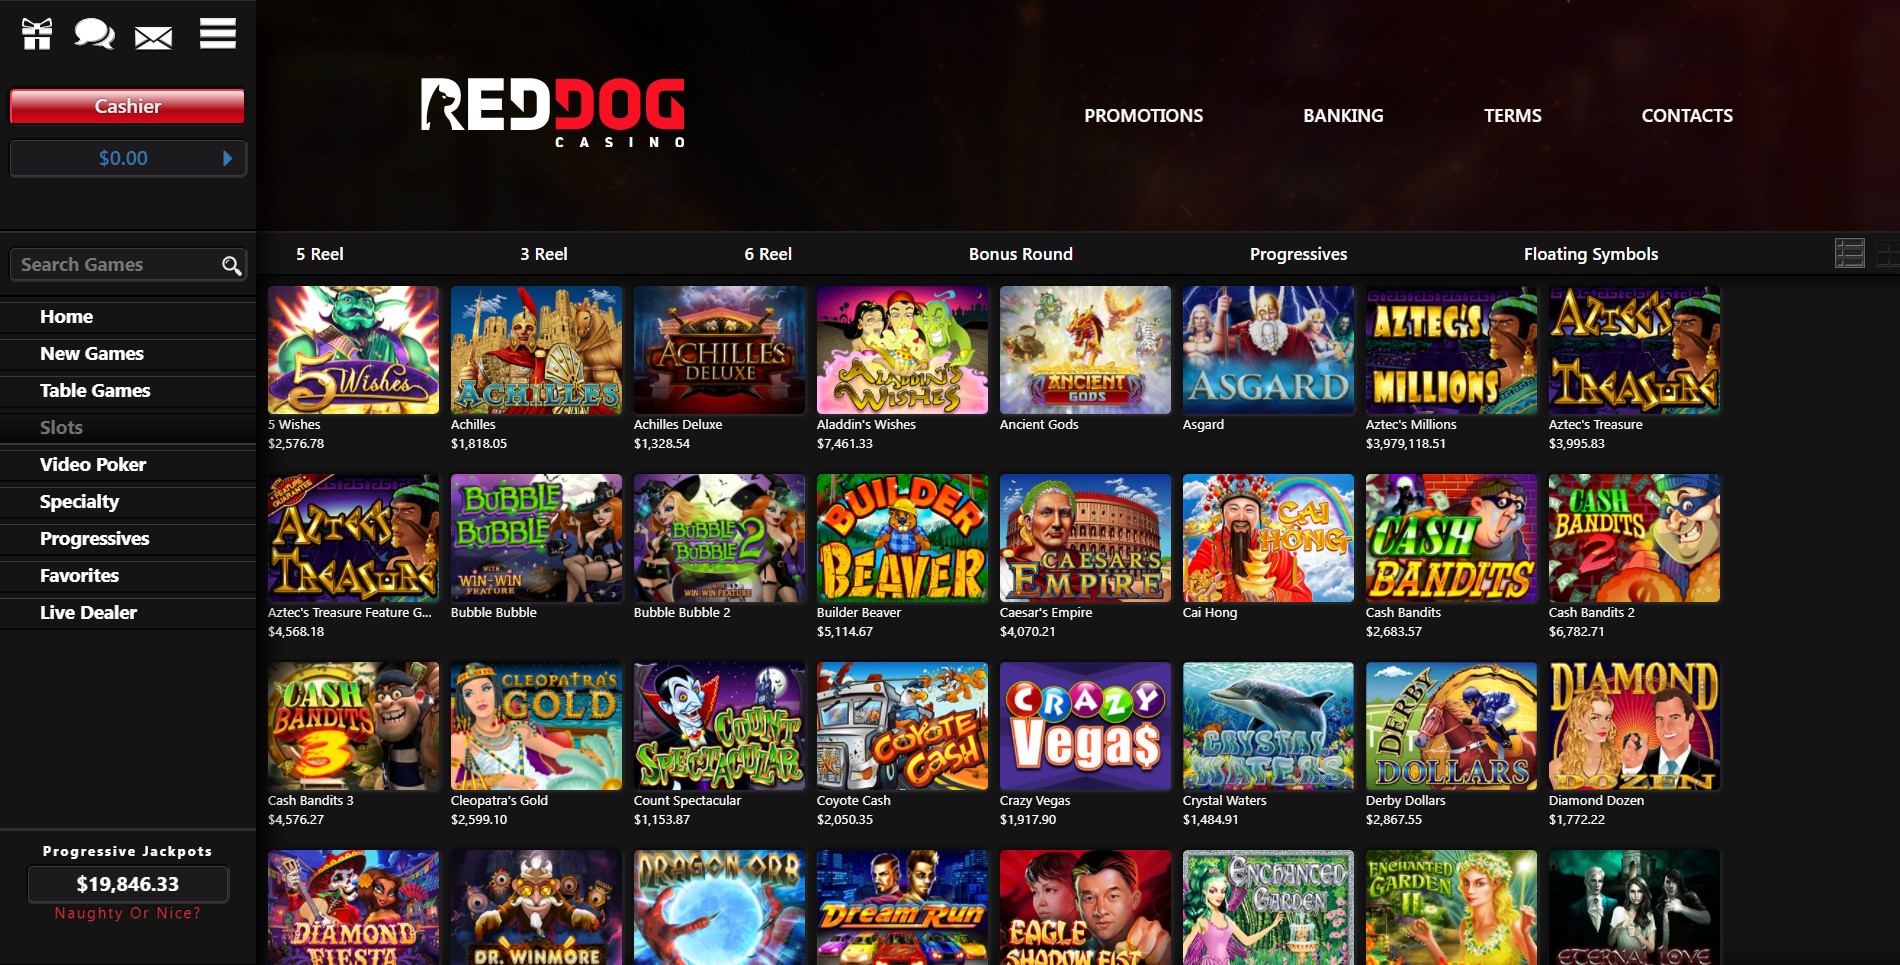 The Red Dog casino game lobby and progressive jackpot total